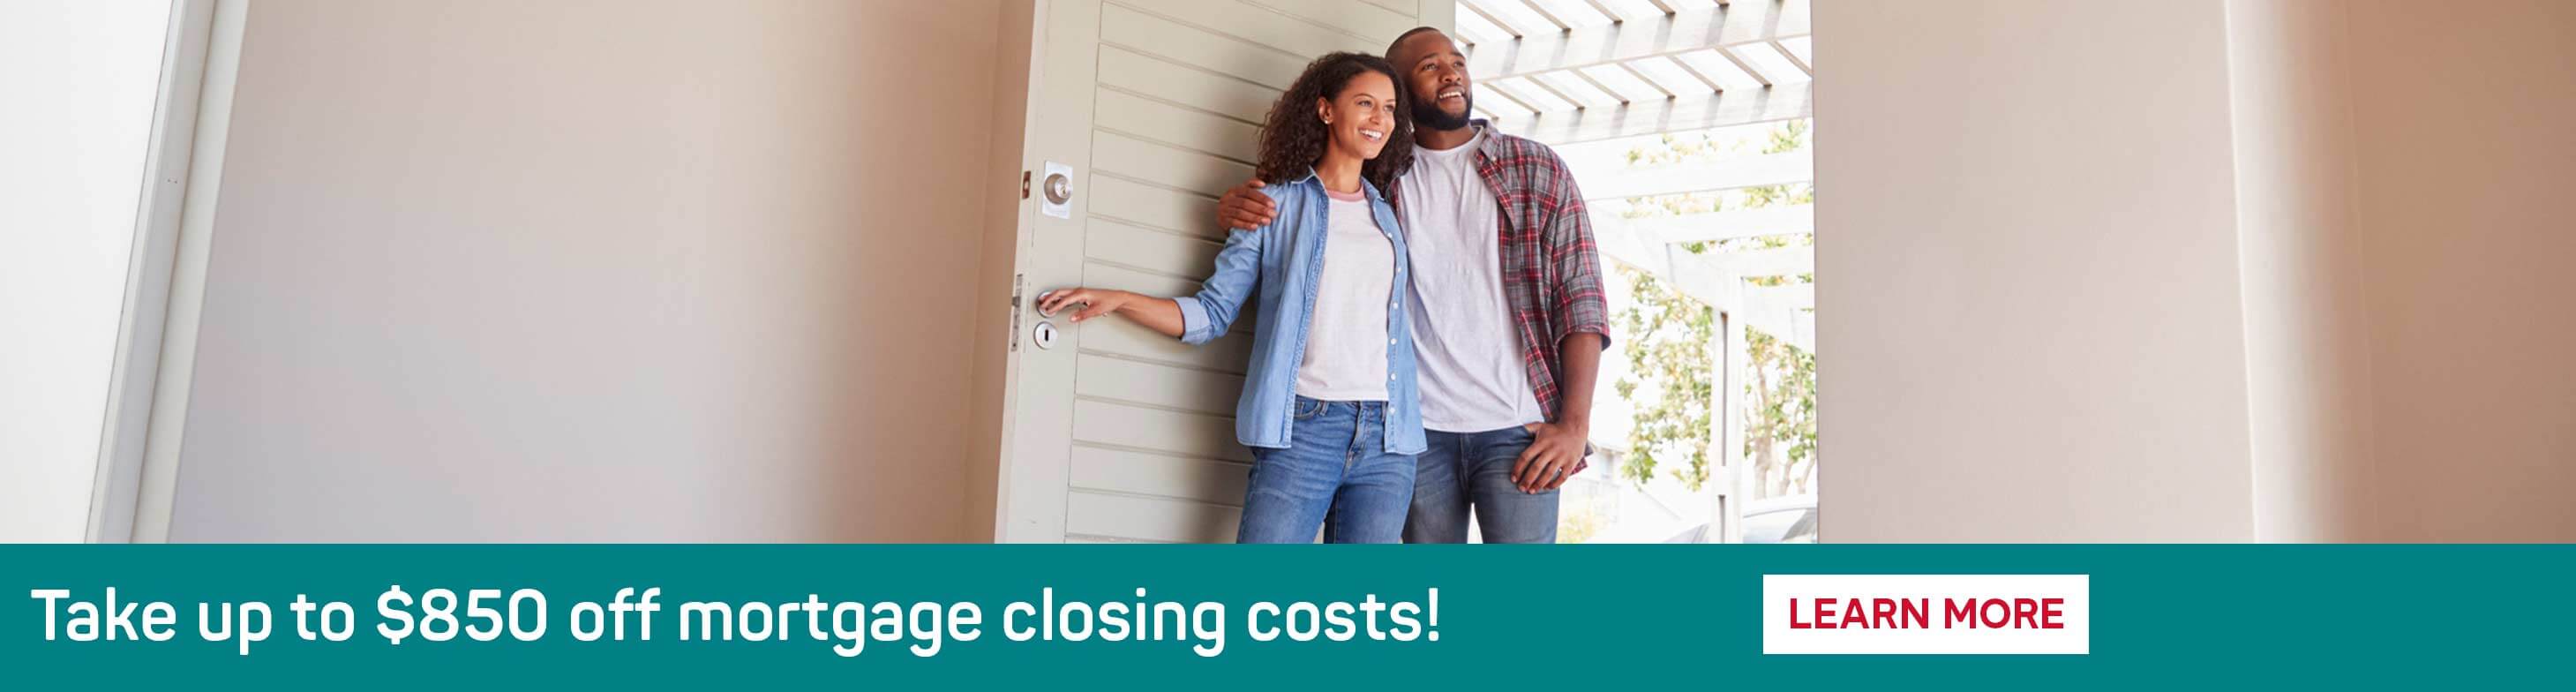 Take up to $850 off mortgage closing costs!